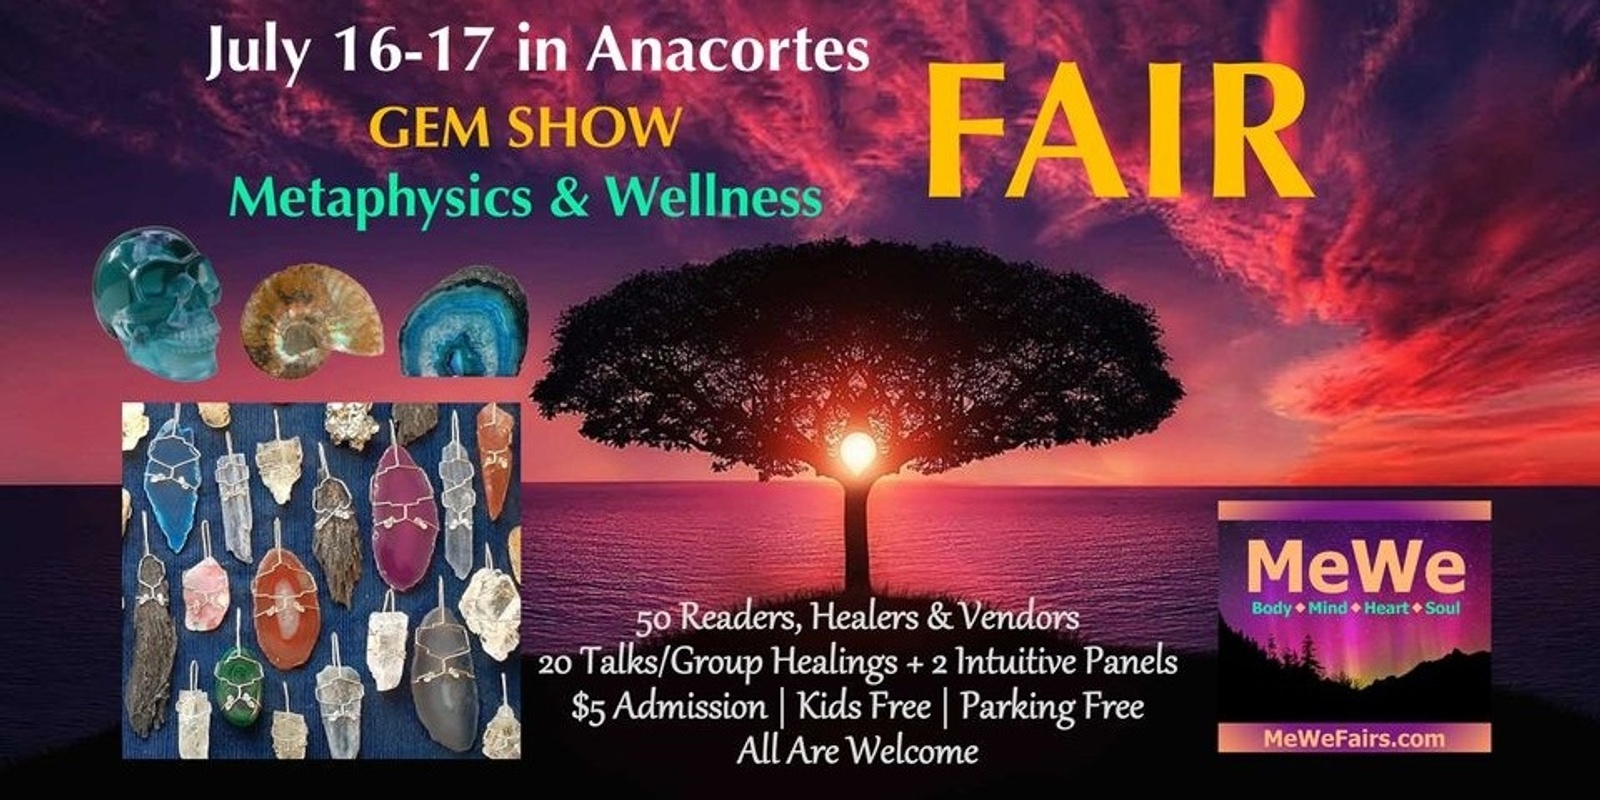 Banner image for Metaphysics & Wellness MeWe Fair + Gem Show in Anacortes, 45 Booths / 20 Talks ($5)